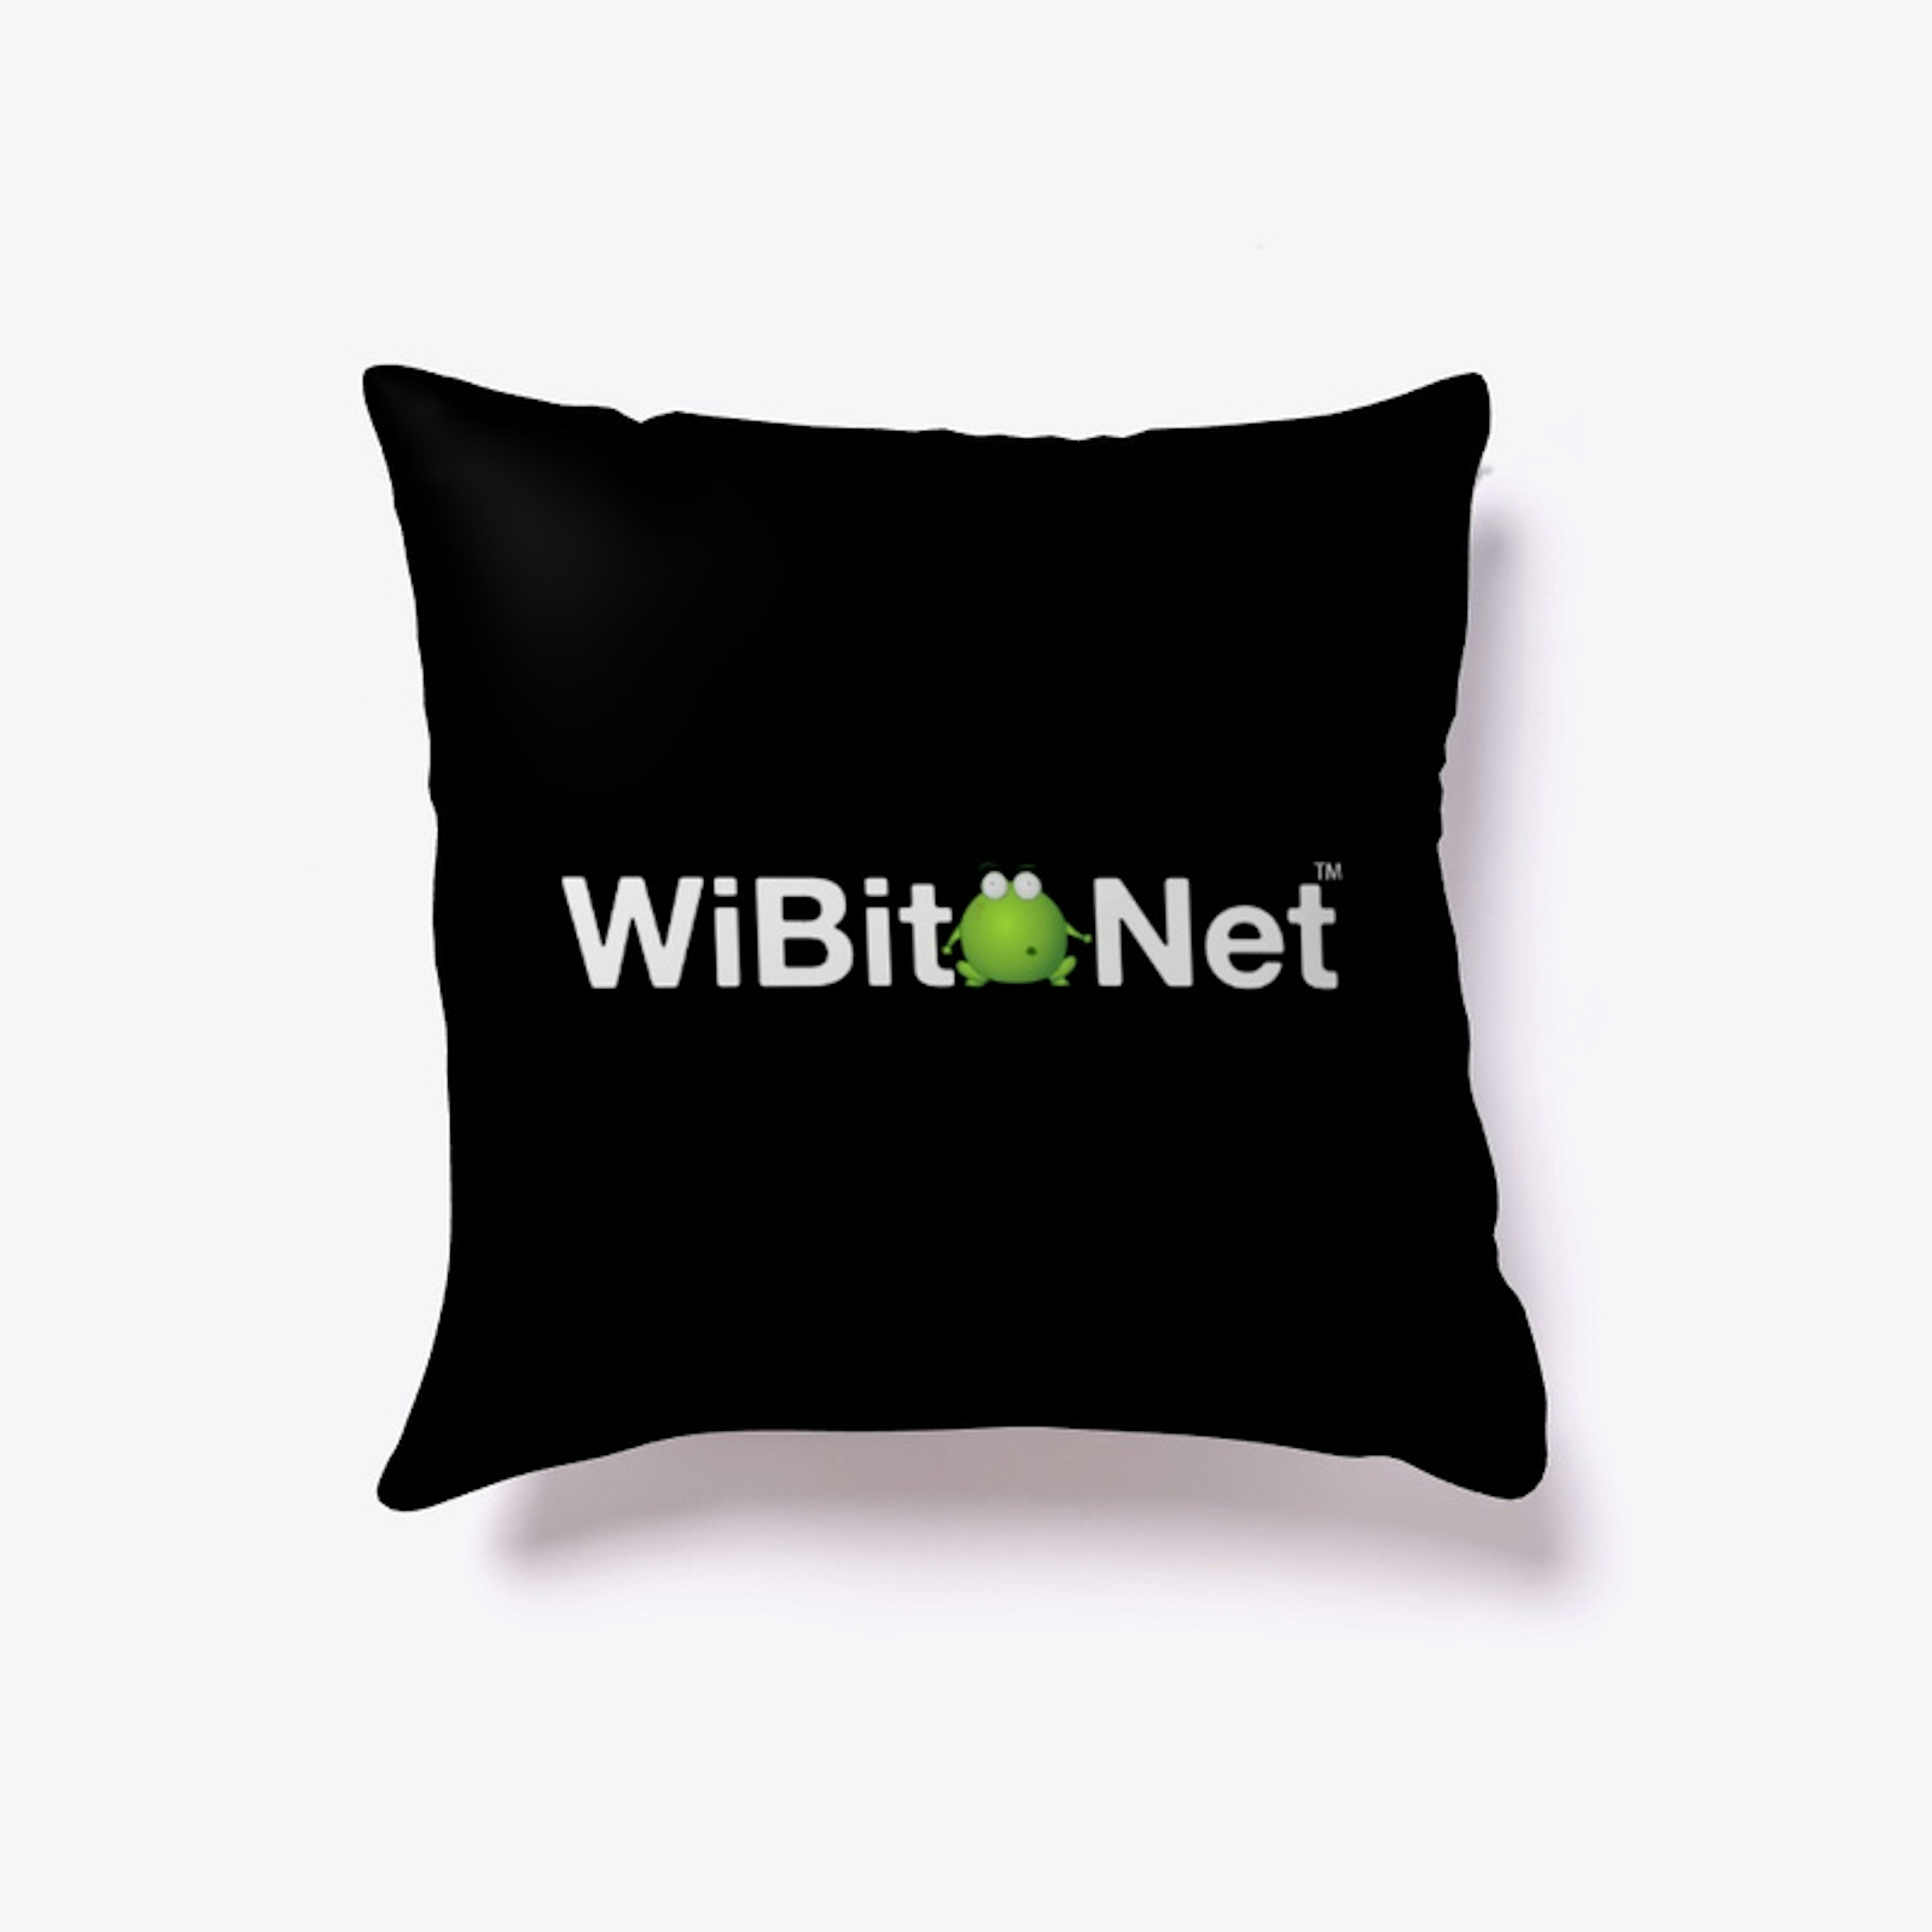 WiBit.Net - May The Source Be With You